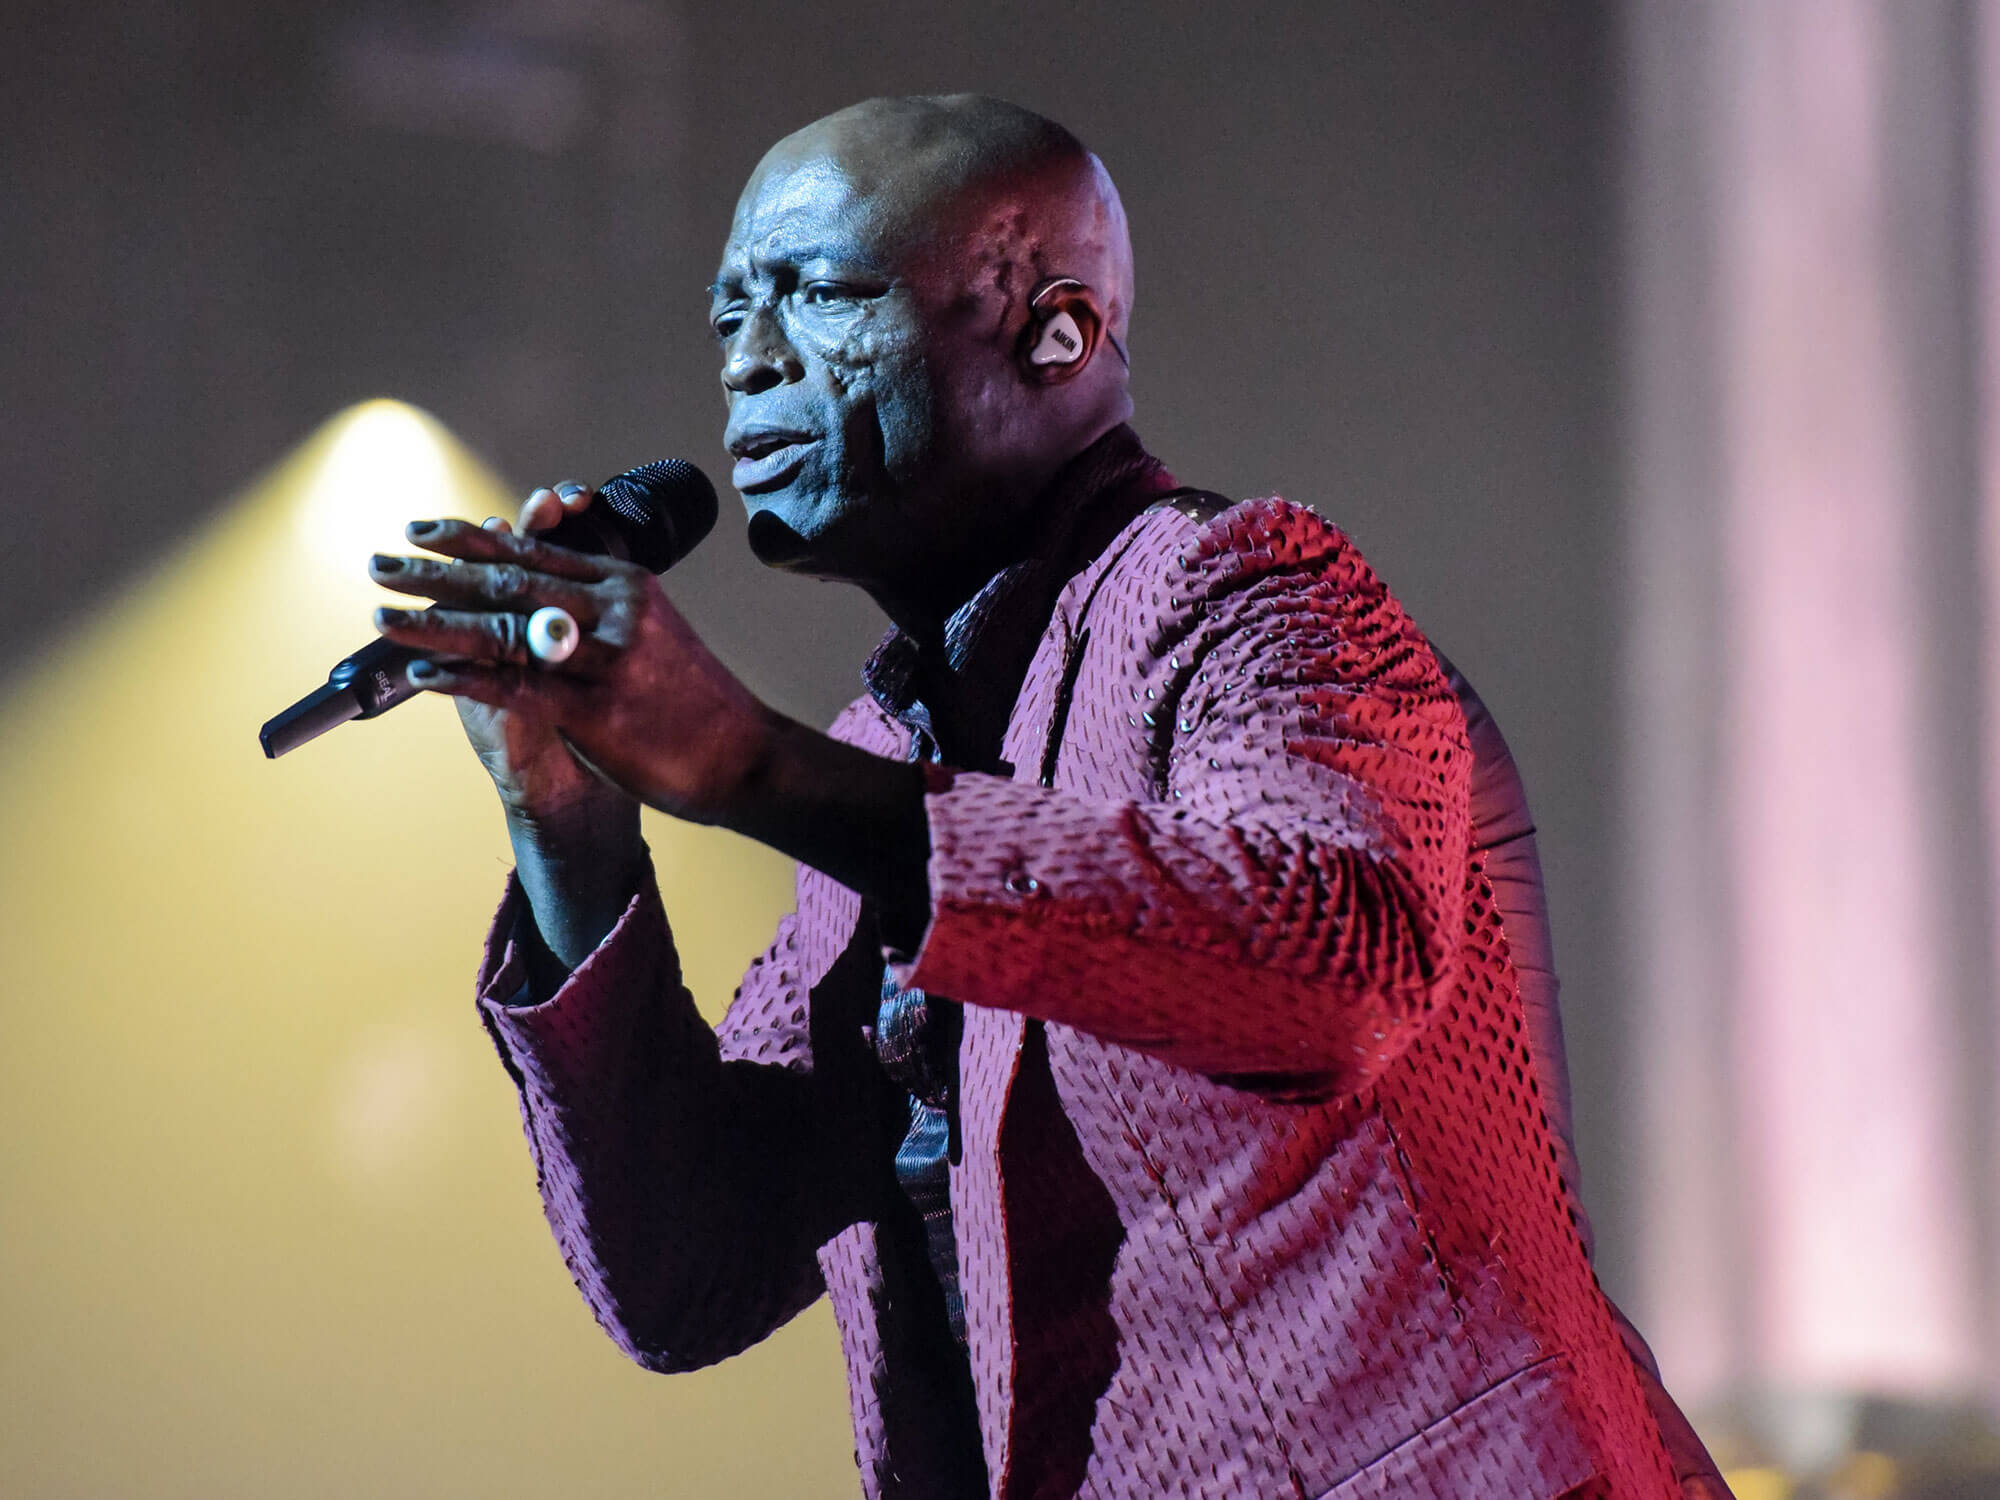 Seal performing live